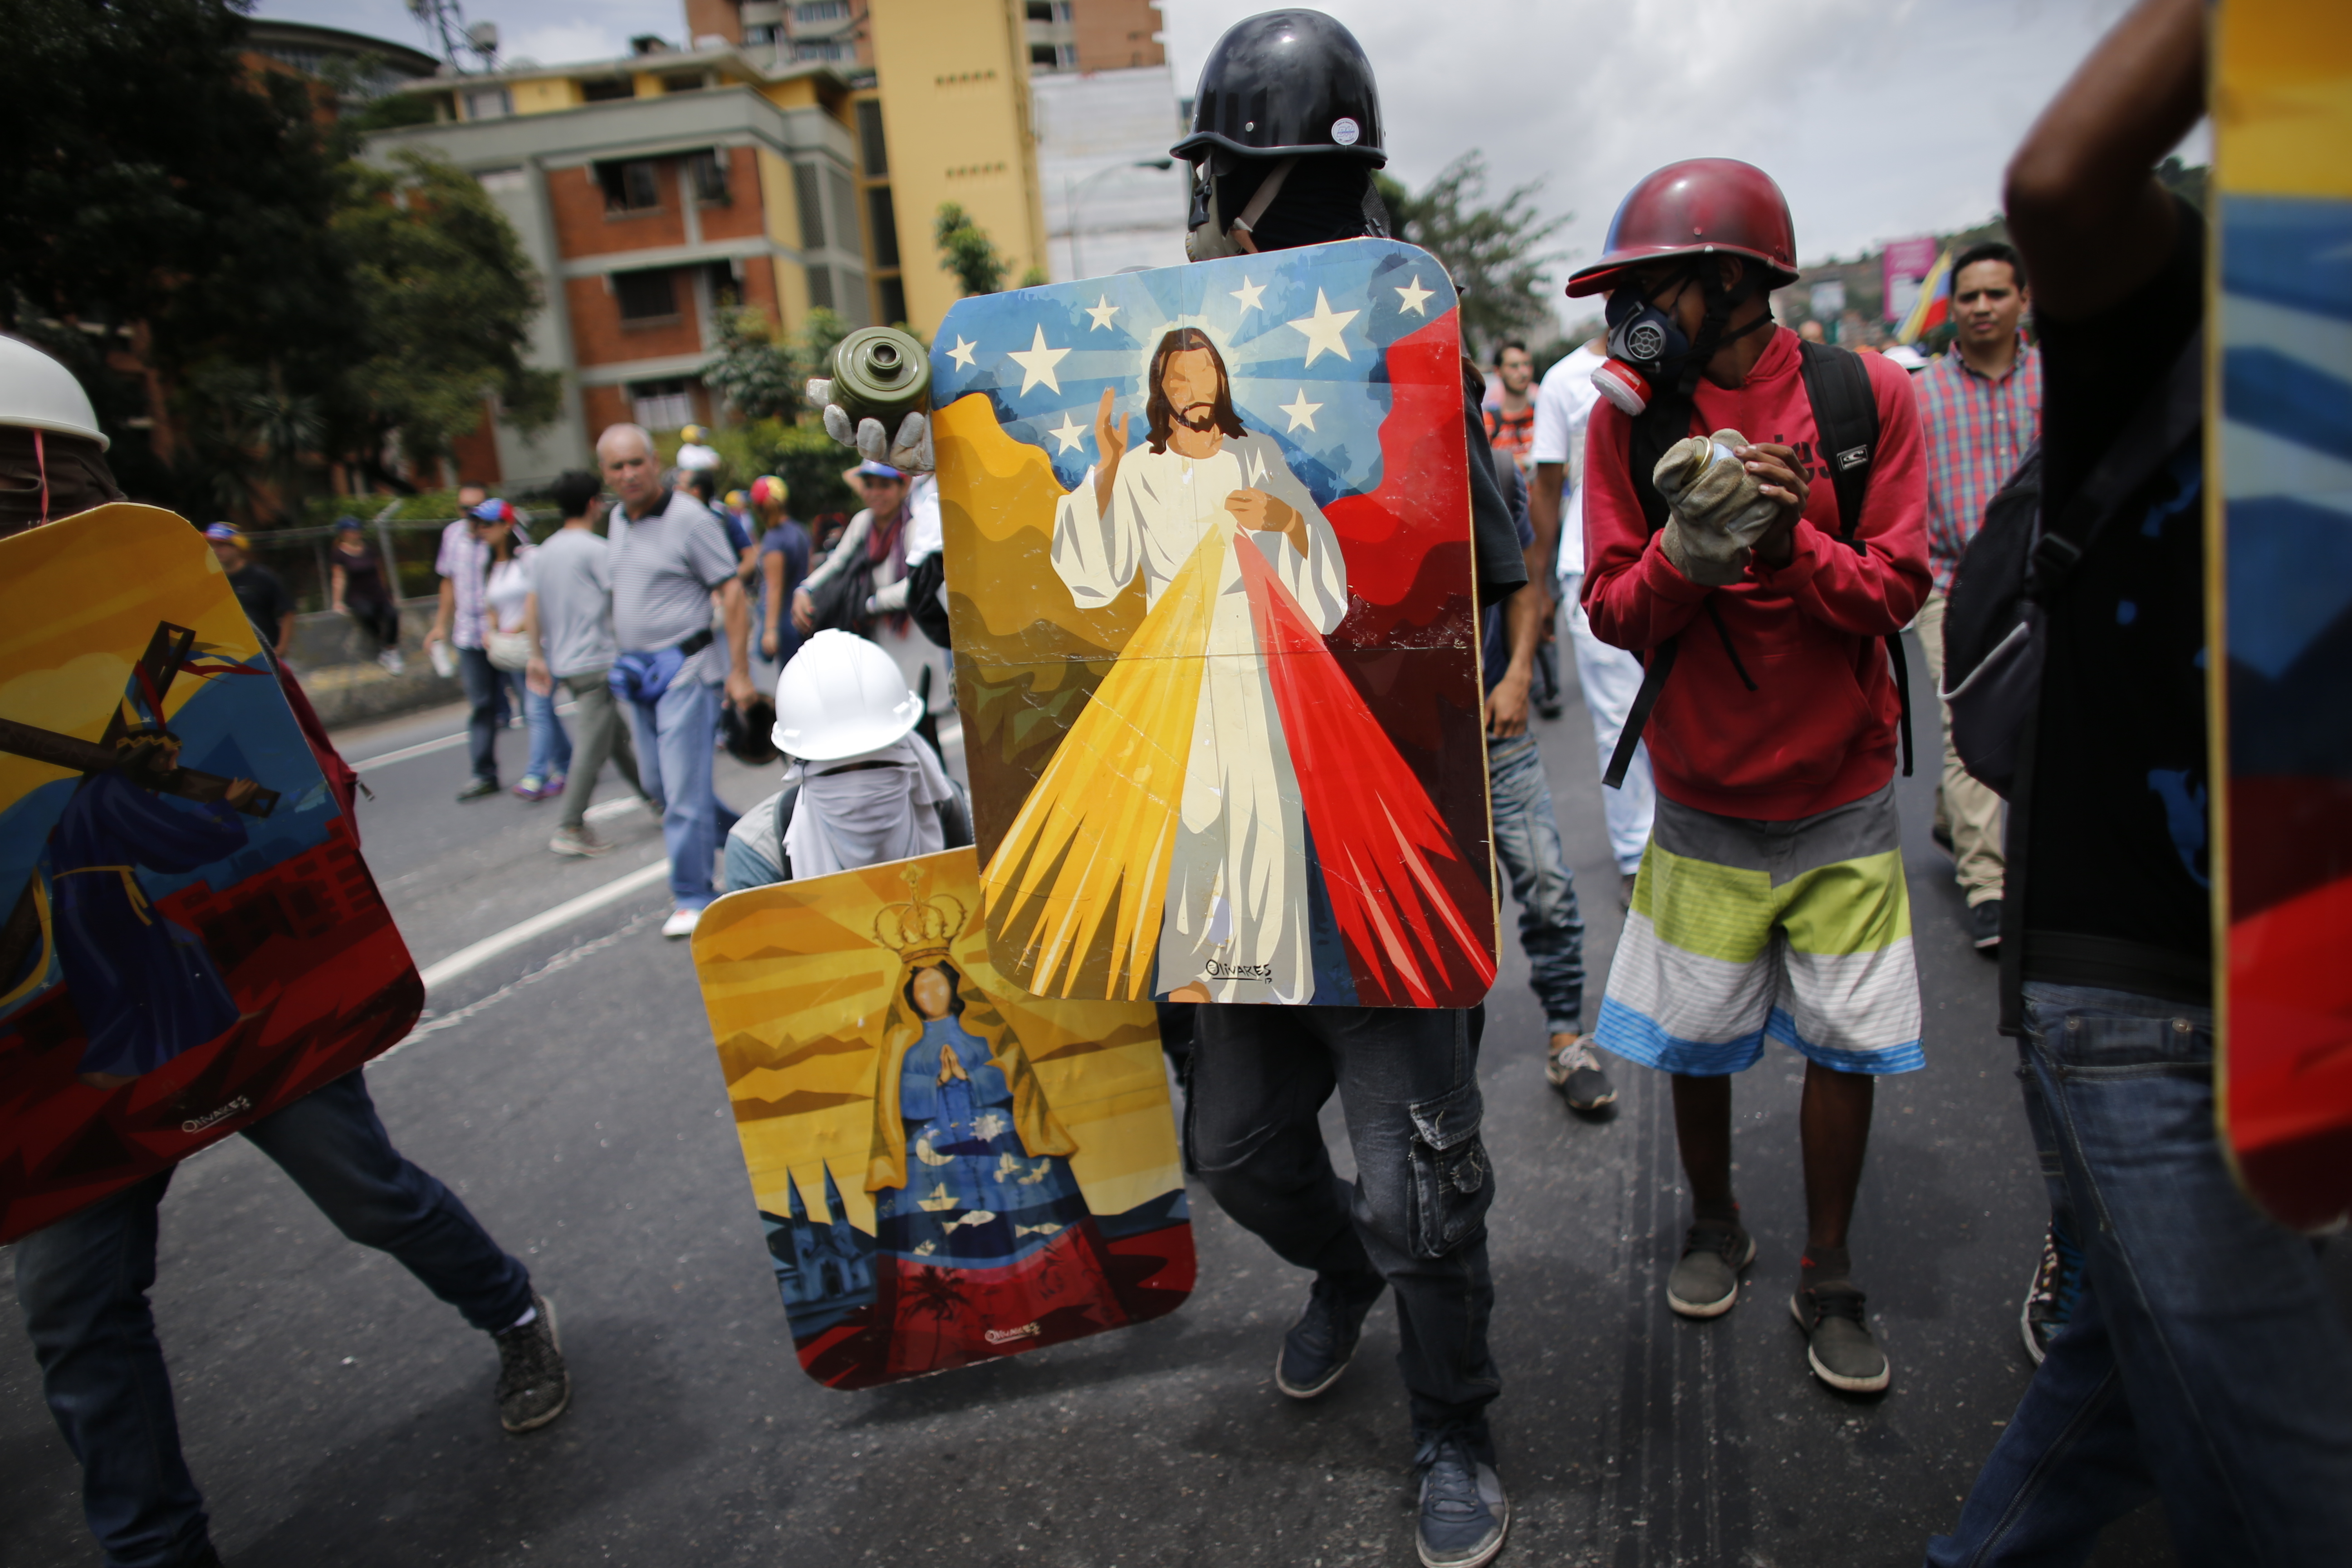 Demonstrators use shields decorated with religious motifs and the colors of Venezuela's national flag prior clashing with government forces on a highway during a march against the government of President Nicolas Maduro in Caracas, Venezuela, Wednesday, May 31, 2017. Protests have left dozens dead in the last two months as the opposition demands immediate presidential elections and the liberation of political prisoners. (AP Photo/Ariana Cubillos)